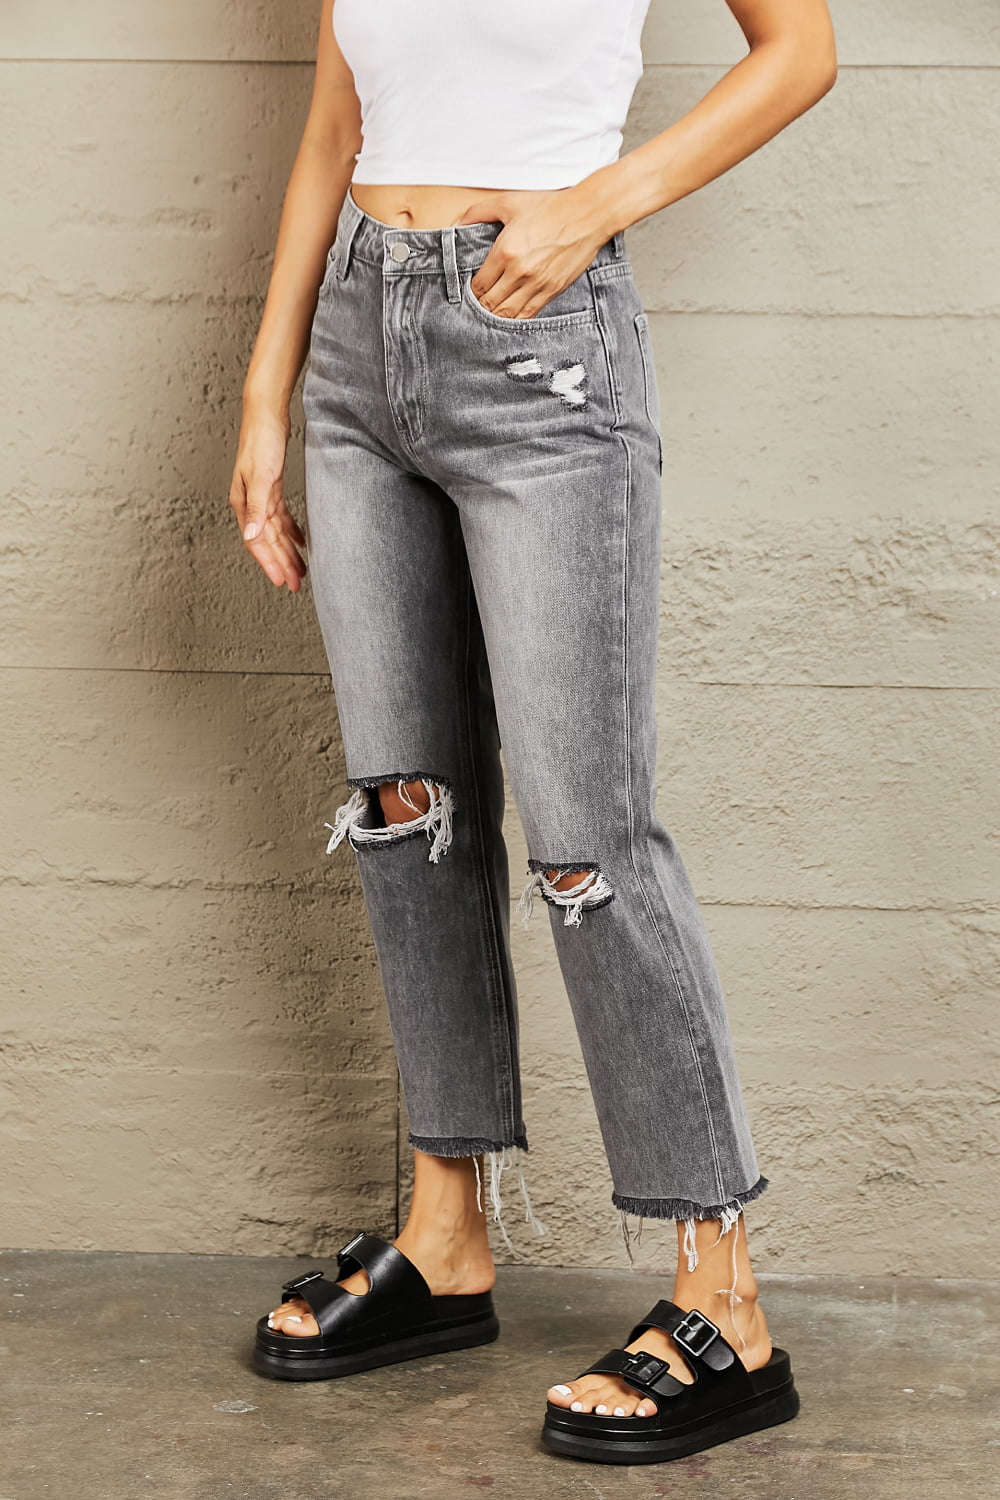 BAYEAS Stone Wash Distressed Cropped Straight Jeans - nailedmoms